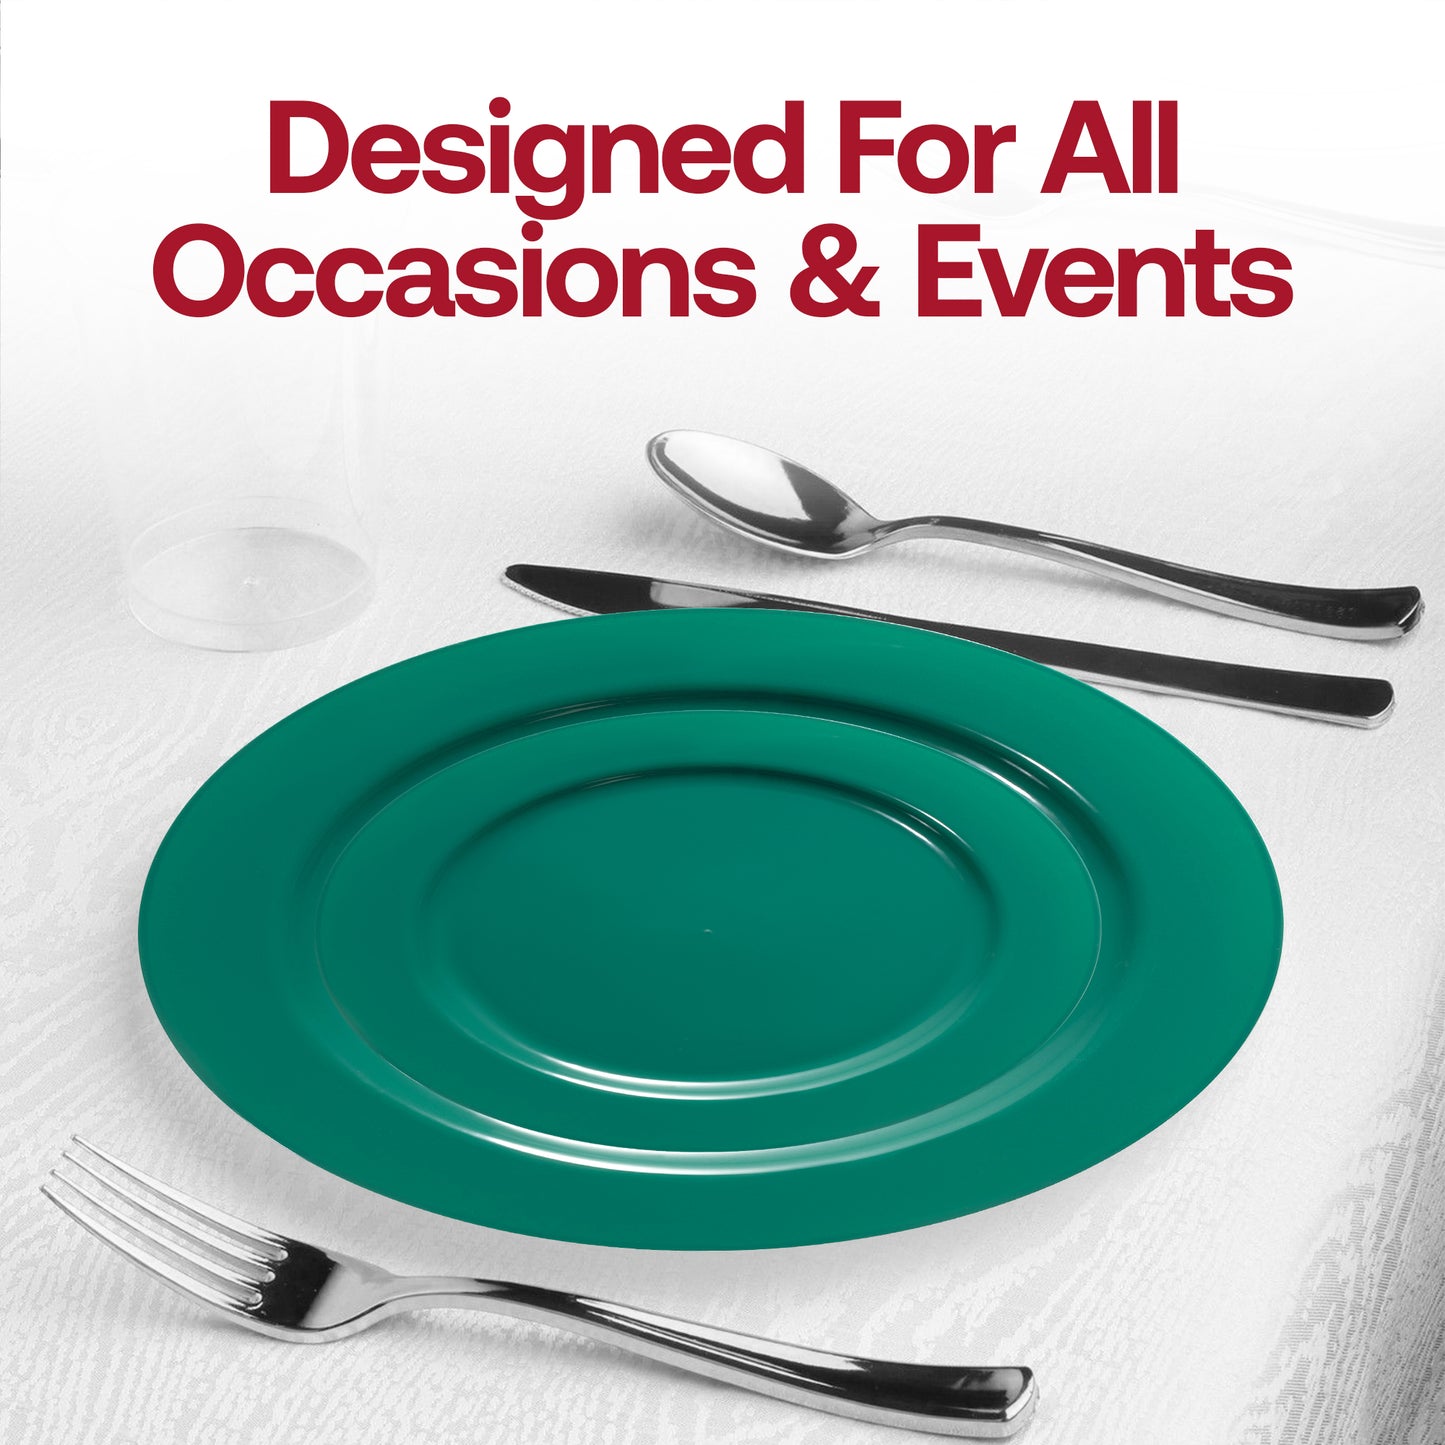 Solid Green Holiday Round Disposable Plastic Salad Plates | The Kaya Collection